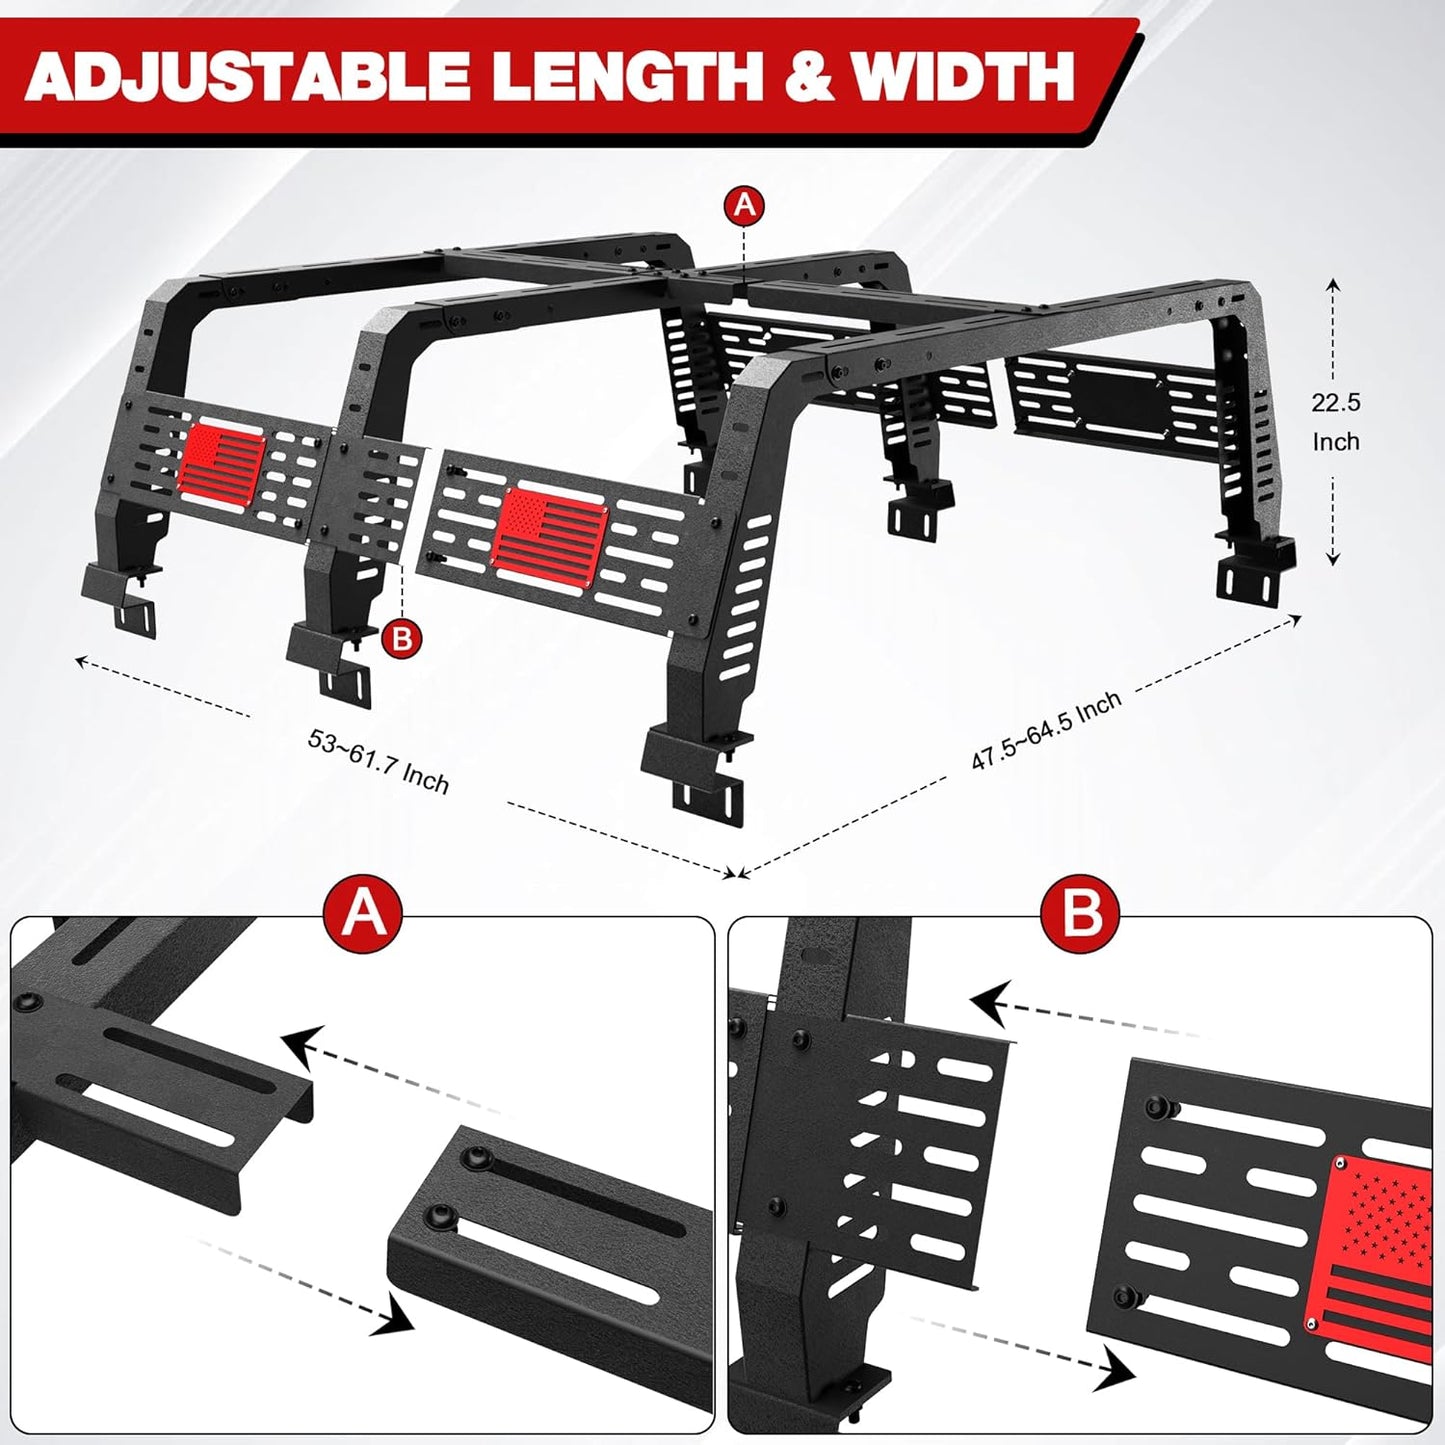 22.5" High Truck Rack for Full-Size Trucks for Dodge Ram 1500, Chevy Silverado 1500, Ford F-150,Toyota Tundra